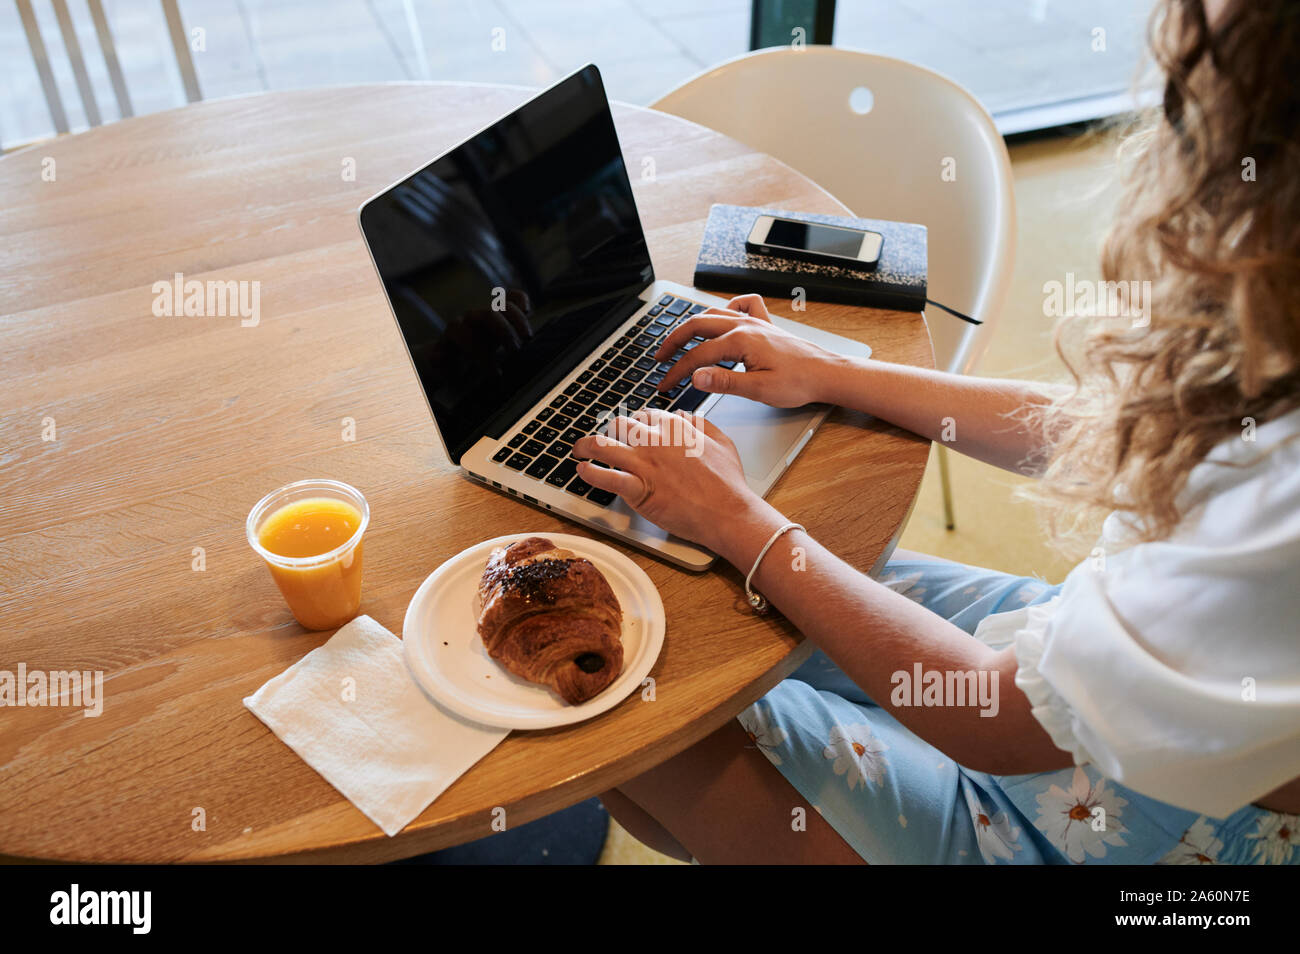 Young woman in a cafe using laptop while having breakfast Stock Photo